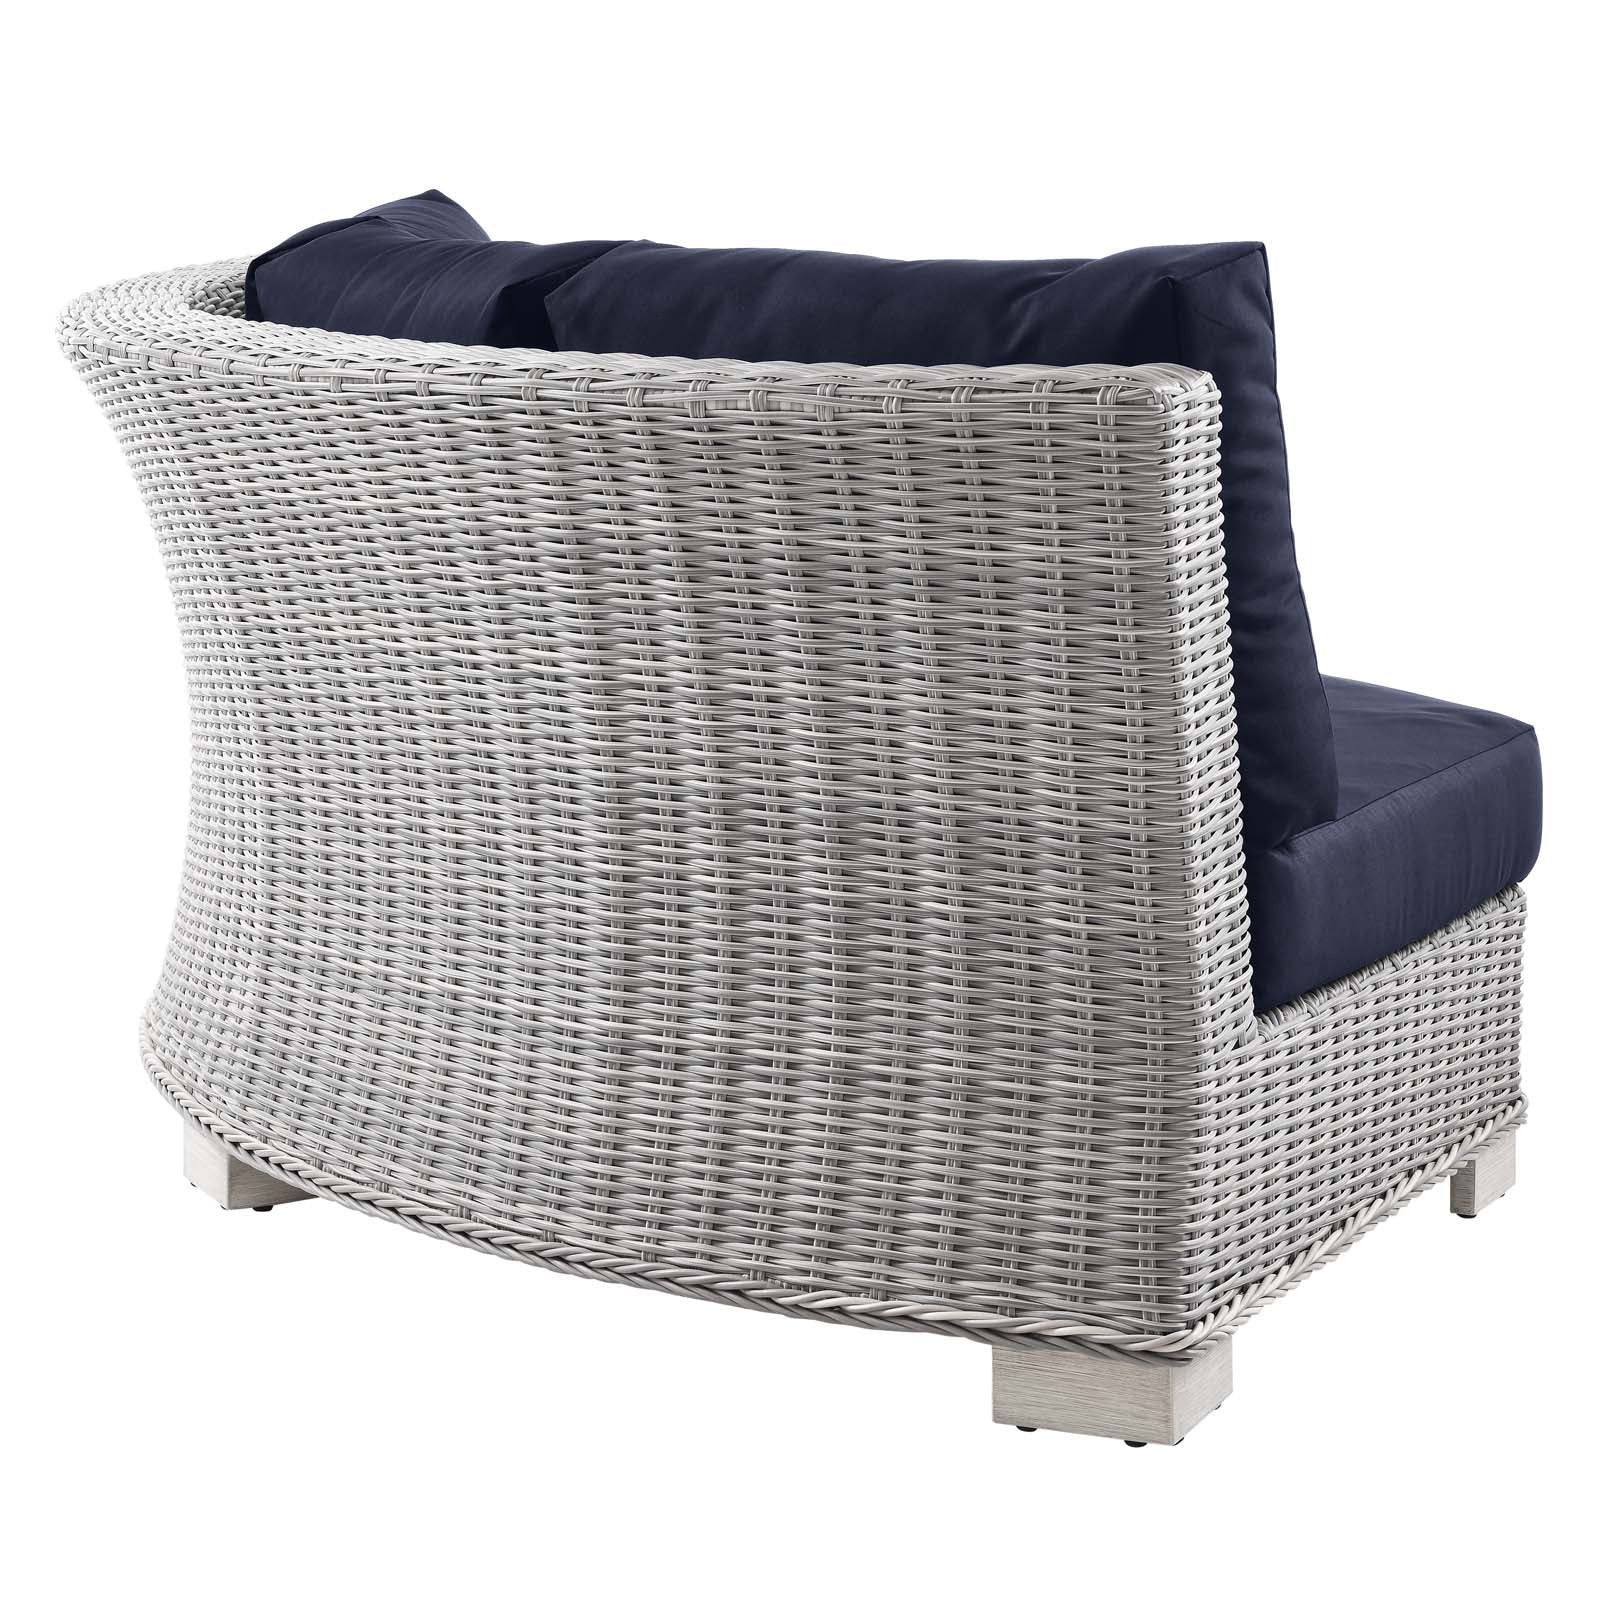 Modway Outdoor Chairs - Conway Outdoor Patio Wicker Rattan Round Corner Chair Light Gray Navy